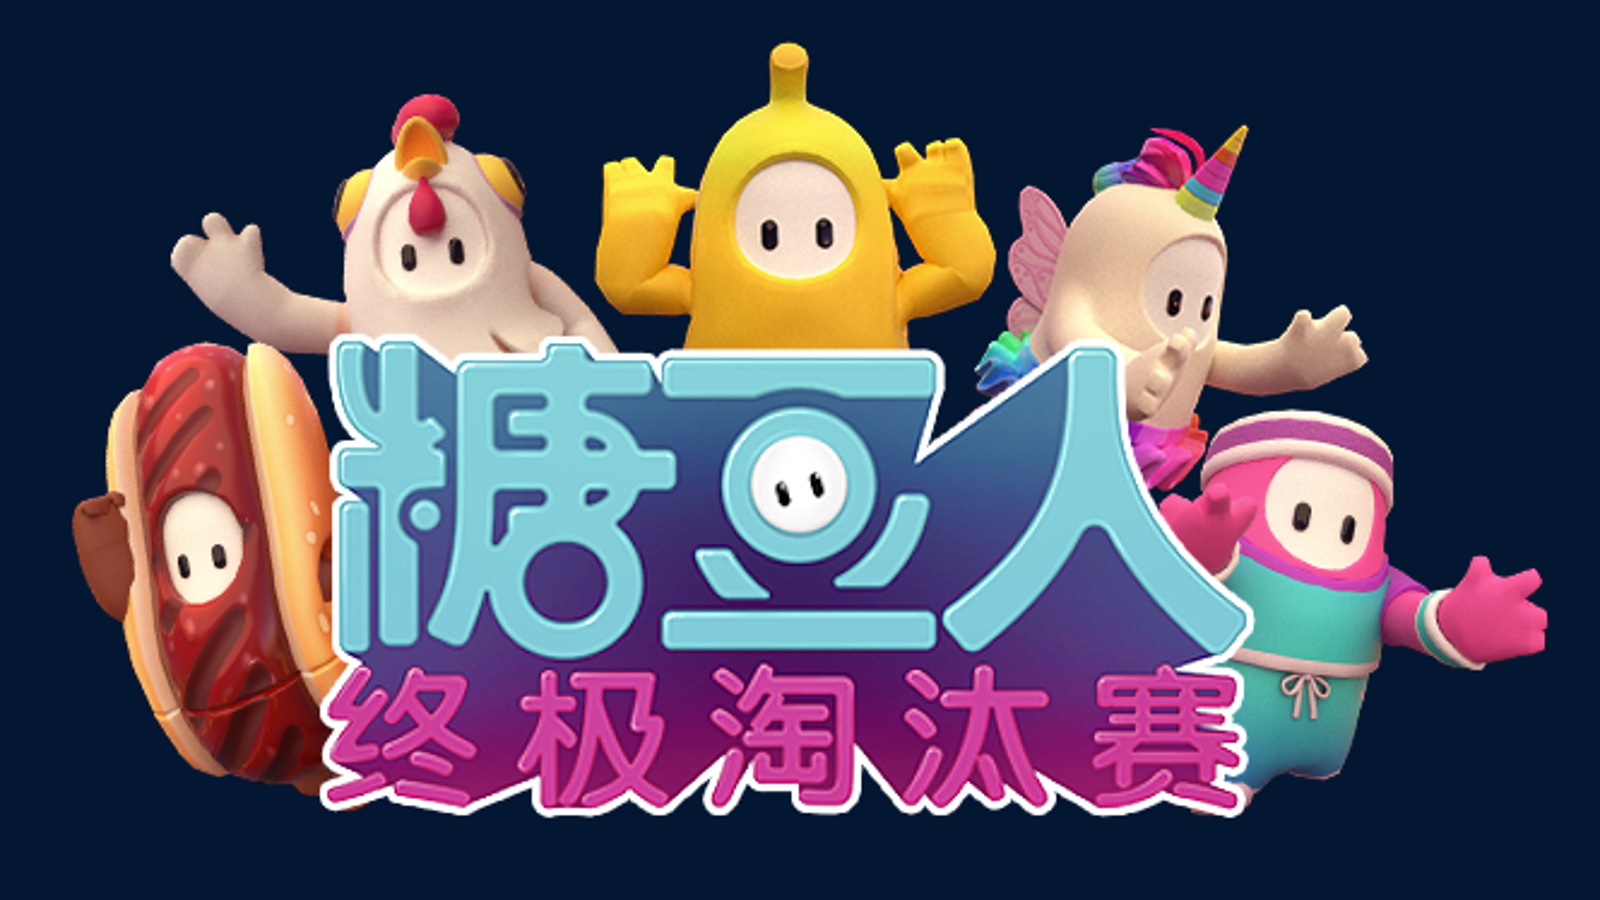 Fall Guys - Mobile version of popular game announced for China